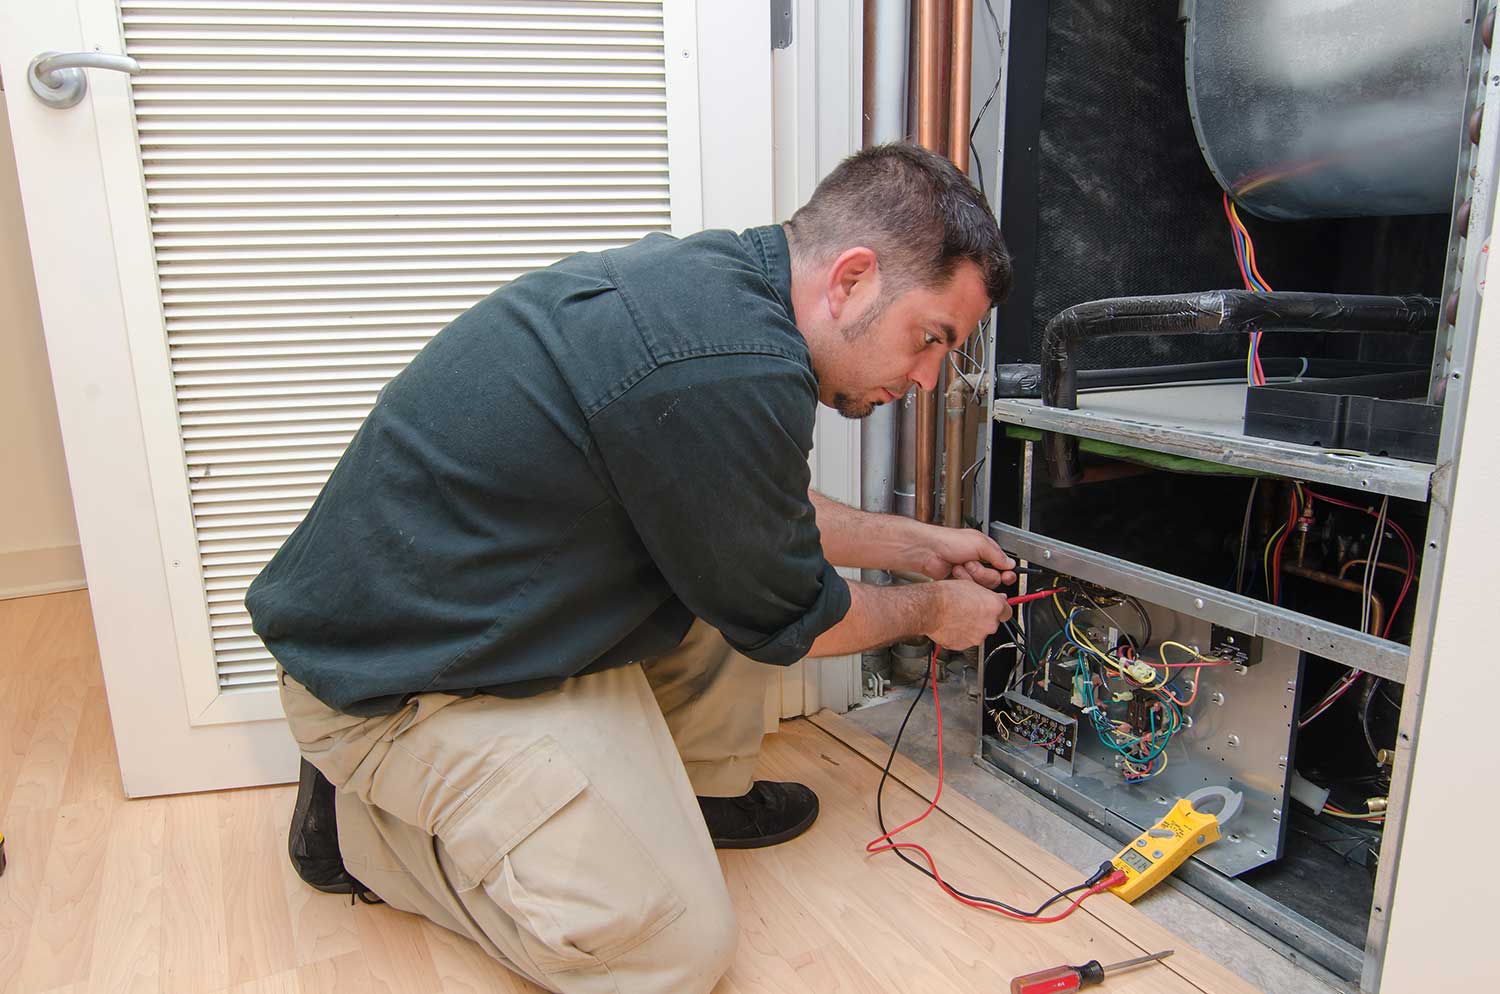 Installing odd systems plus Heating plus Air Conditioning unit through an Heating plus Air Conditioning professional